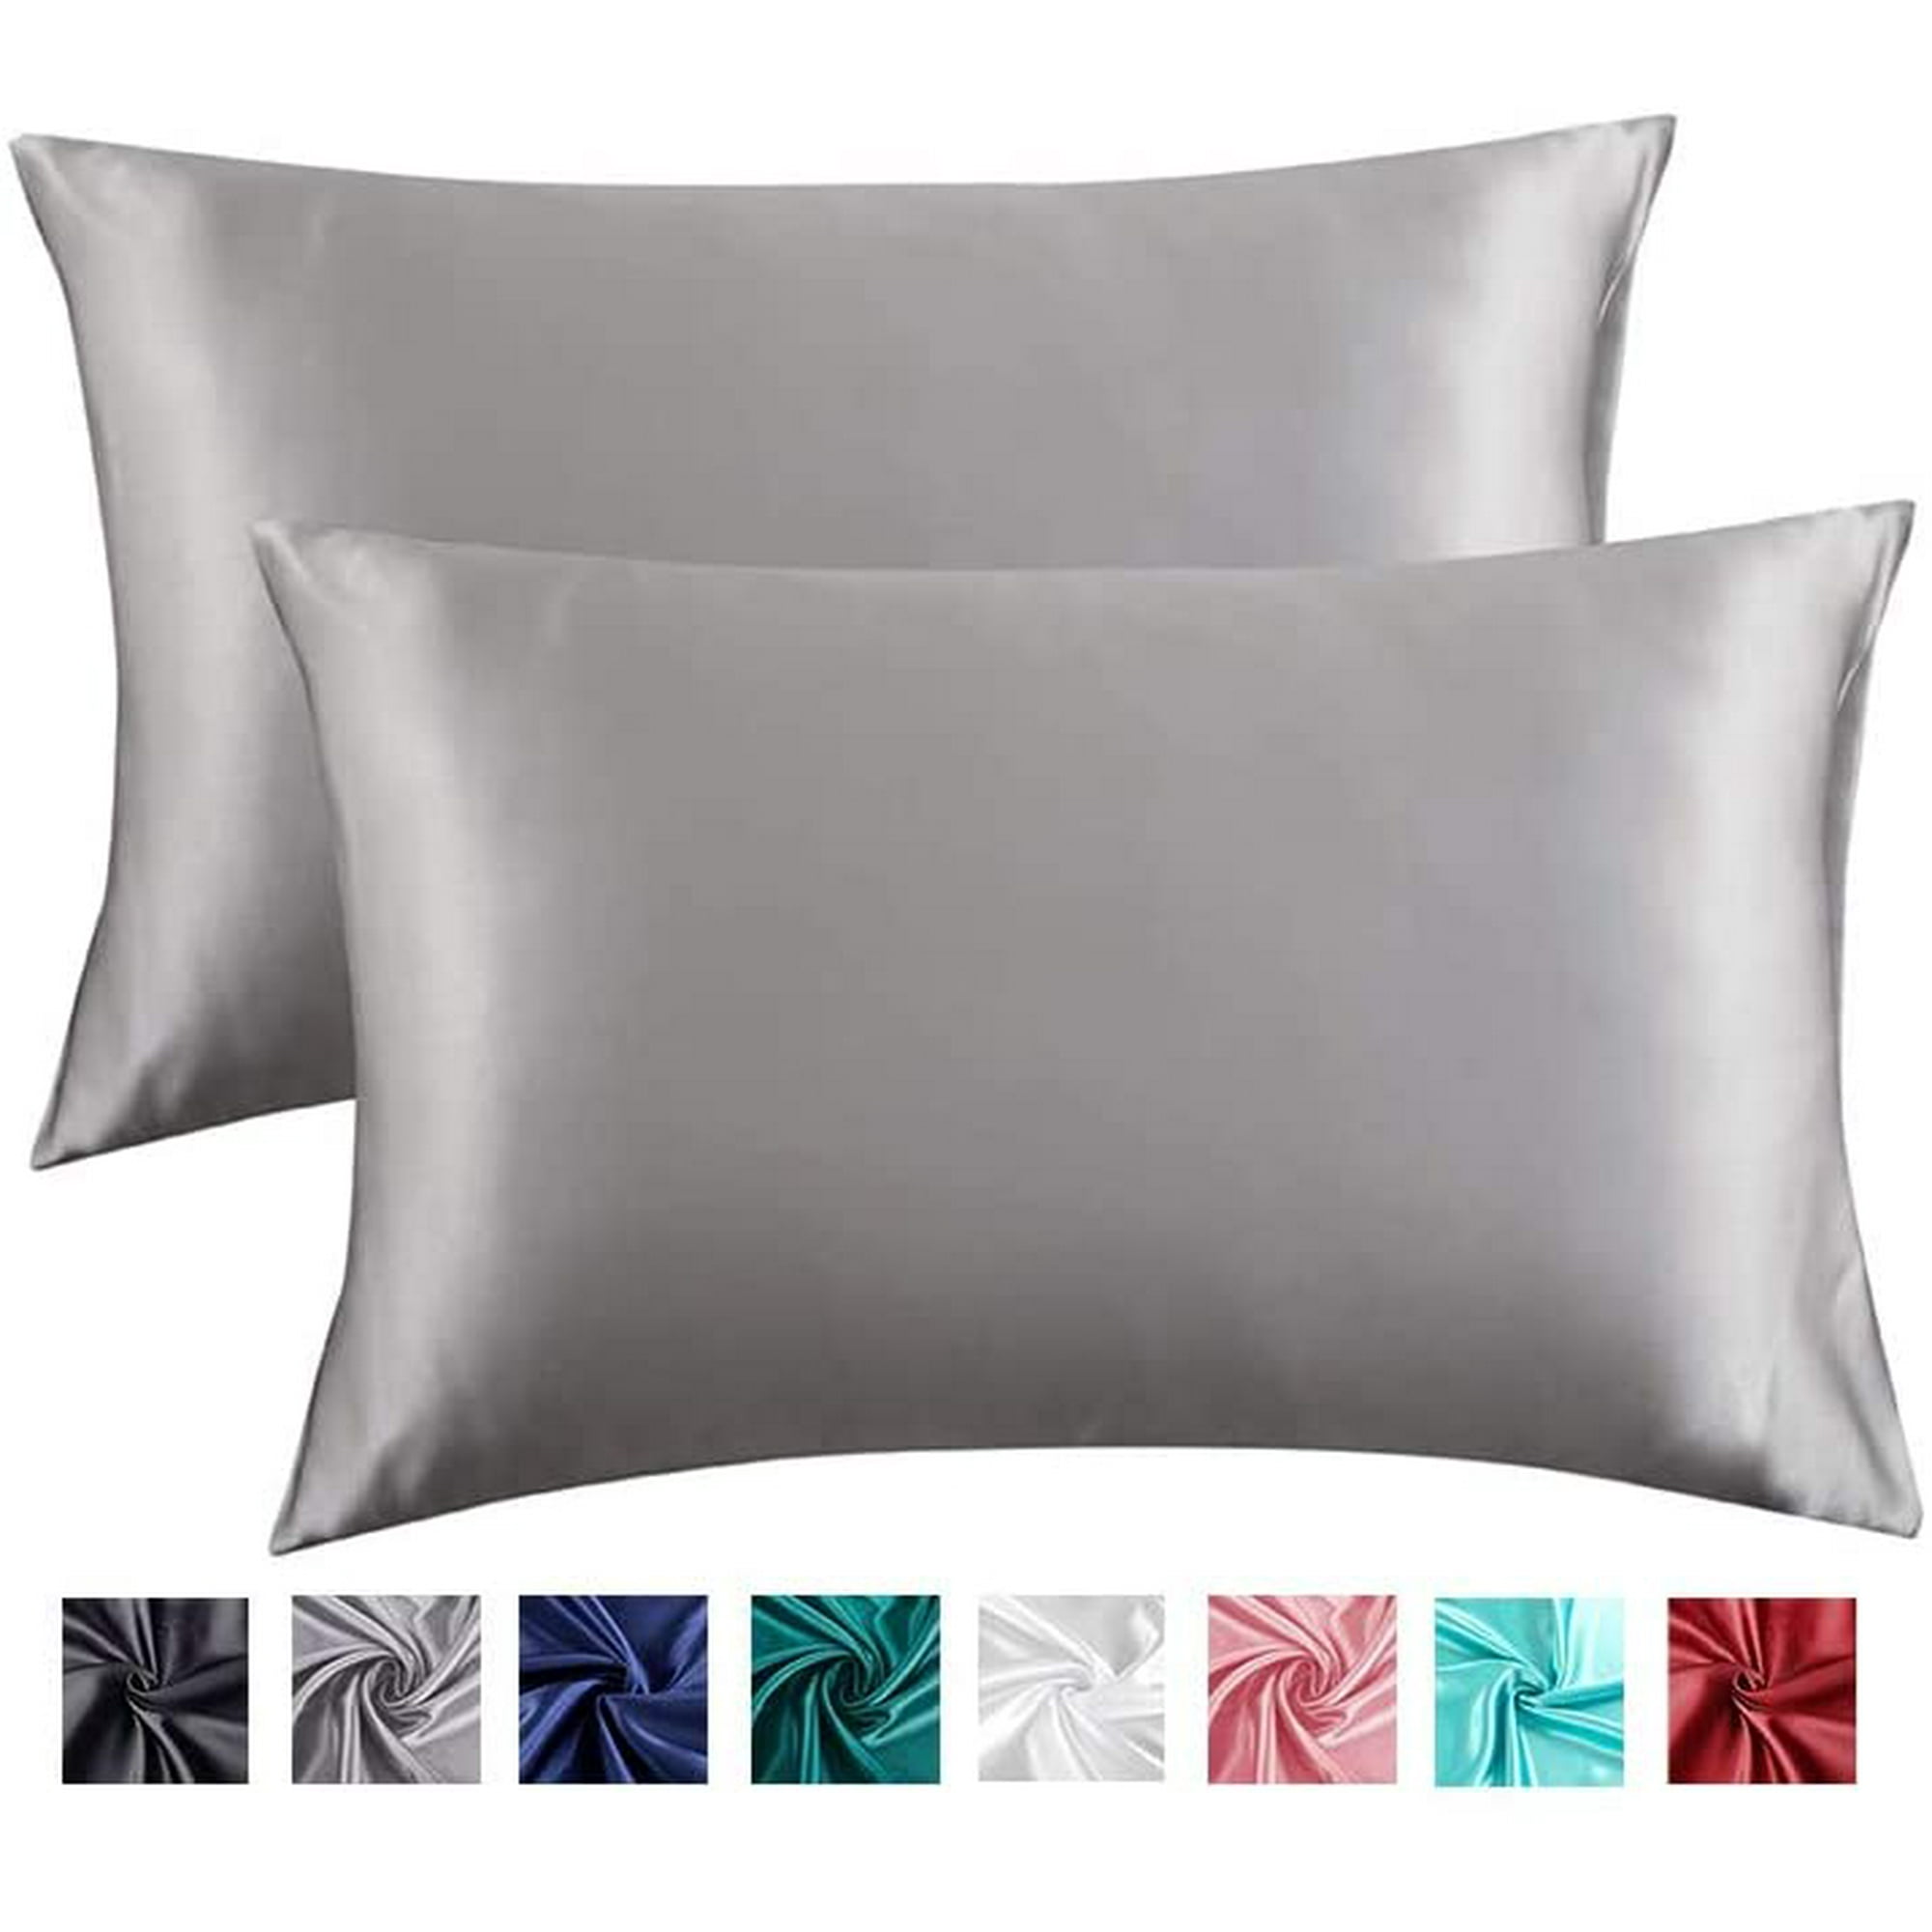 Satin Pillowcase Set of 2 - Silk Pillow Cases for Hair and Skin , Satin  Pillow Covers 2 Pack with Envelope Closure | Walmart Canada